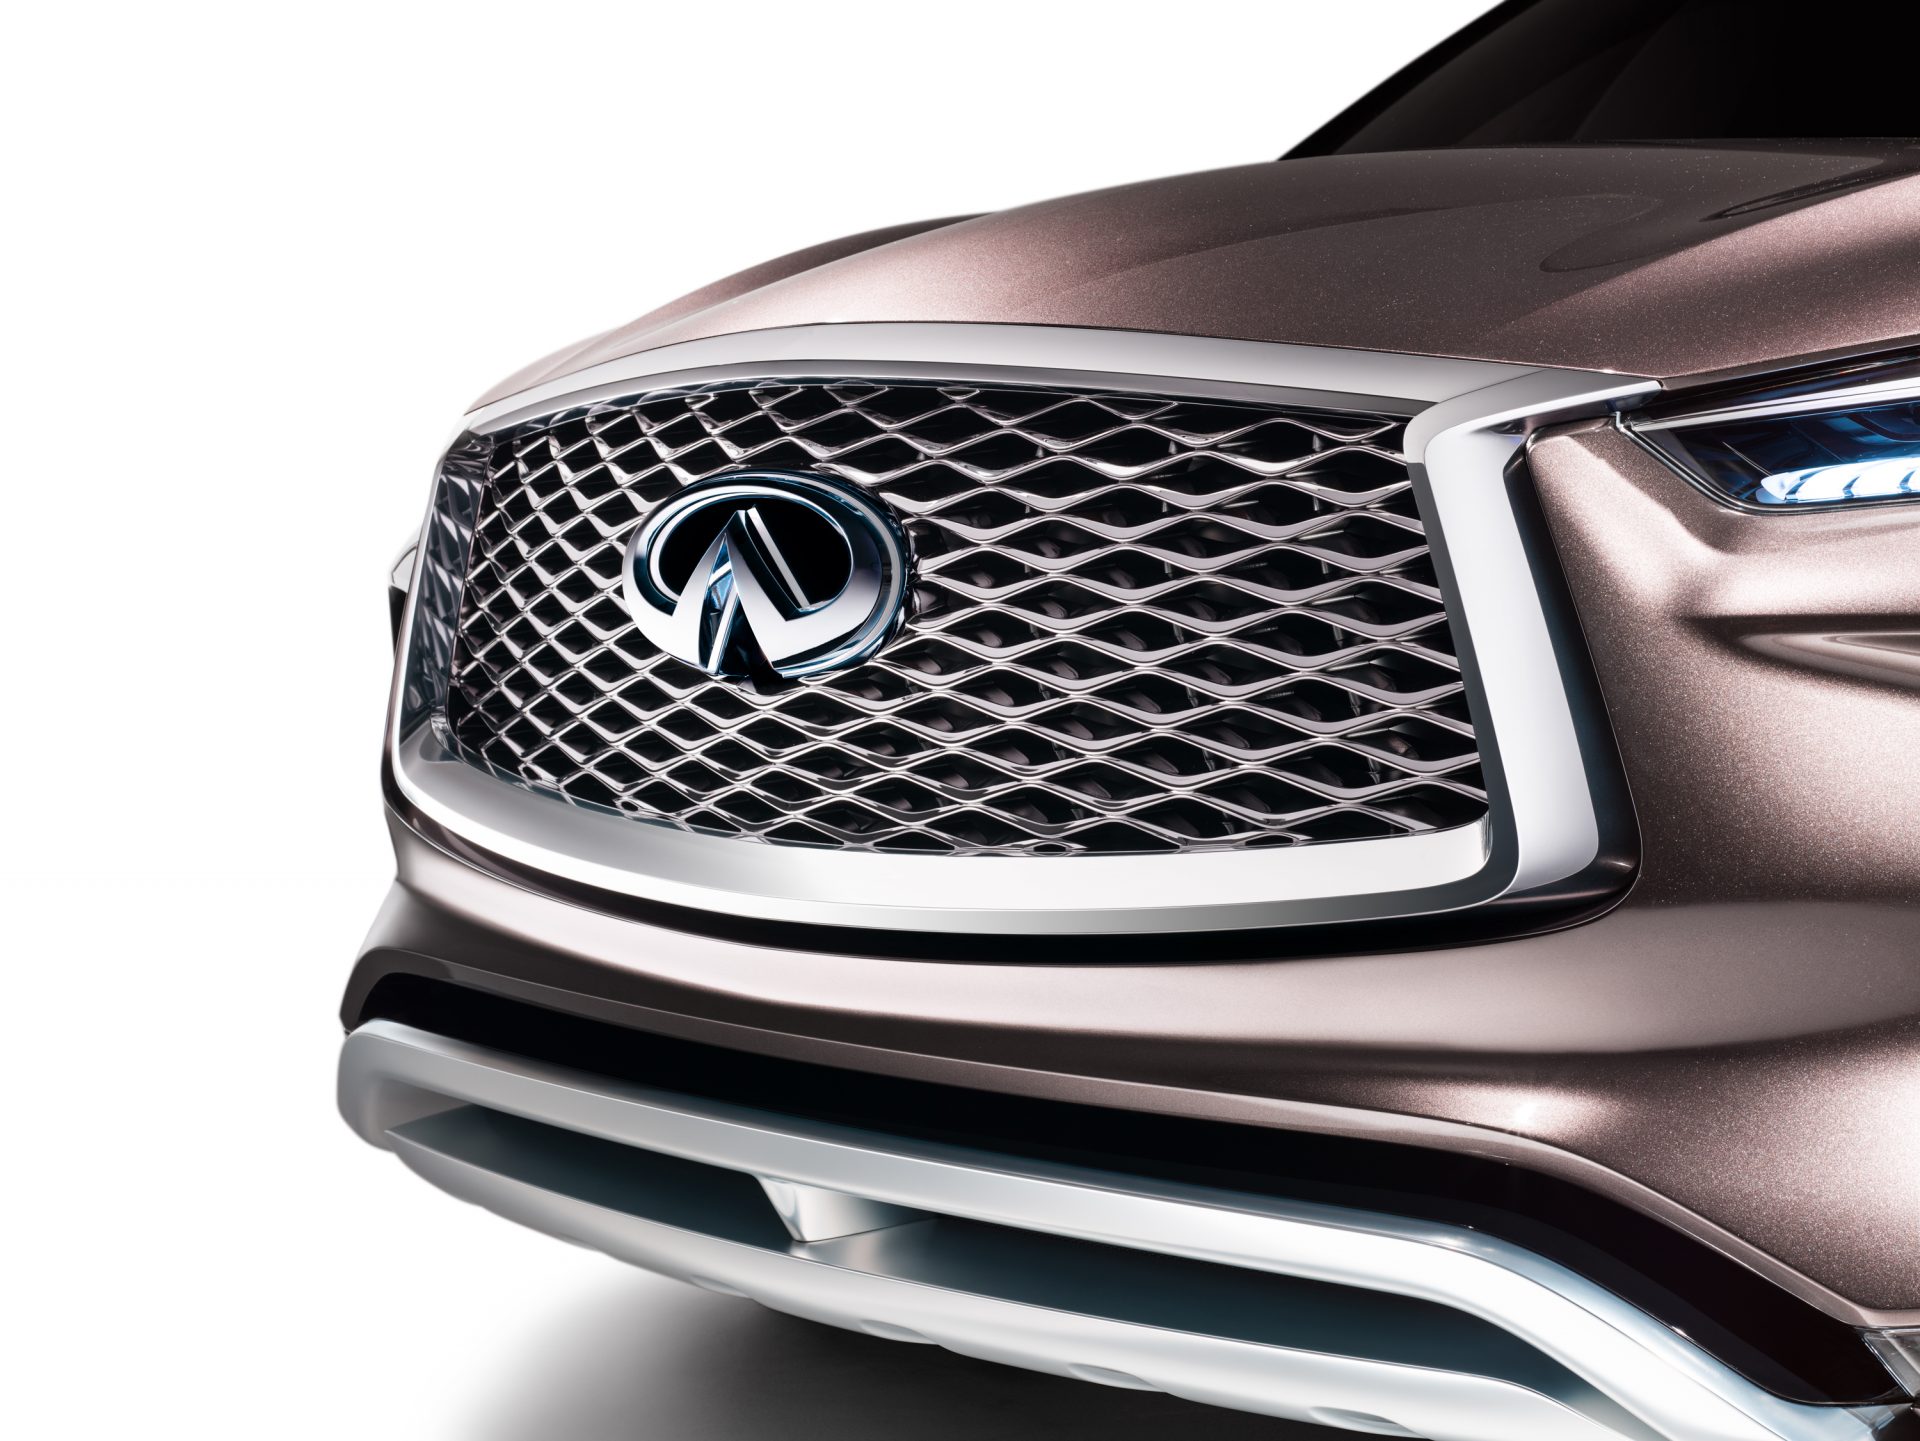 Demonstrating how the design of the 2016 QX Sport Inspiration, its conceptual forebear, could be adapted for a future production model, the QX50 Concept confidently articulates INFINITI’s ‘Powerful Elegance’ design language. A ‘cabin-forward’ silhouette combines with muscular lines and flowing surfaces to telegraph its purpose as a dynamic and practical crossover.